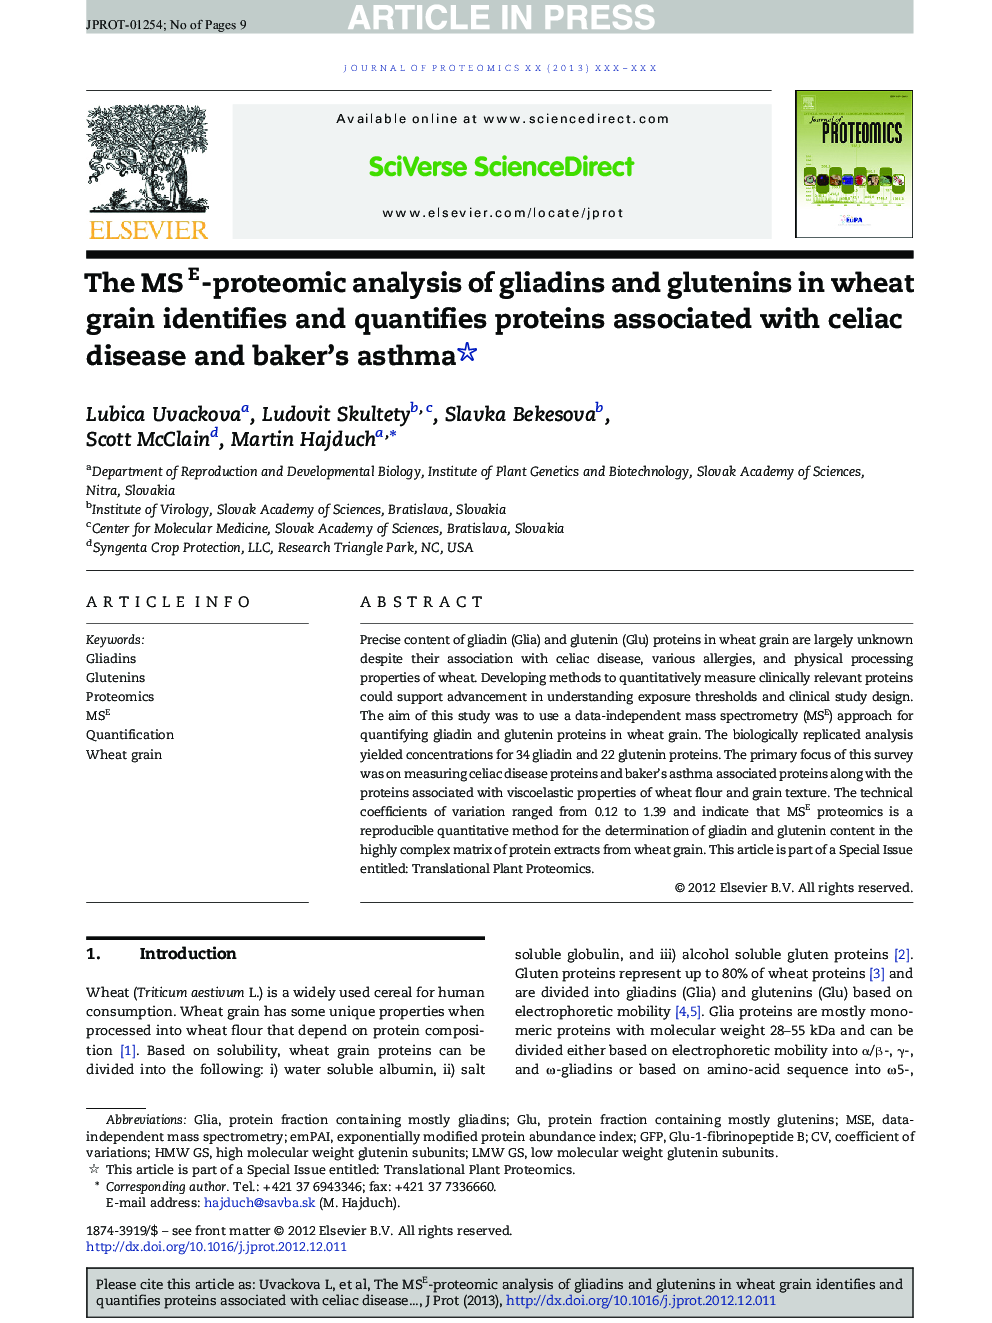 The MSE-proteomic analysis of gliadins and glutenins in wheat grain identifies and quantifies proteins associated with celiac disease and baker's asthma